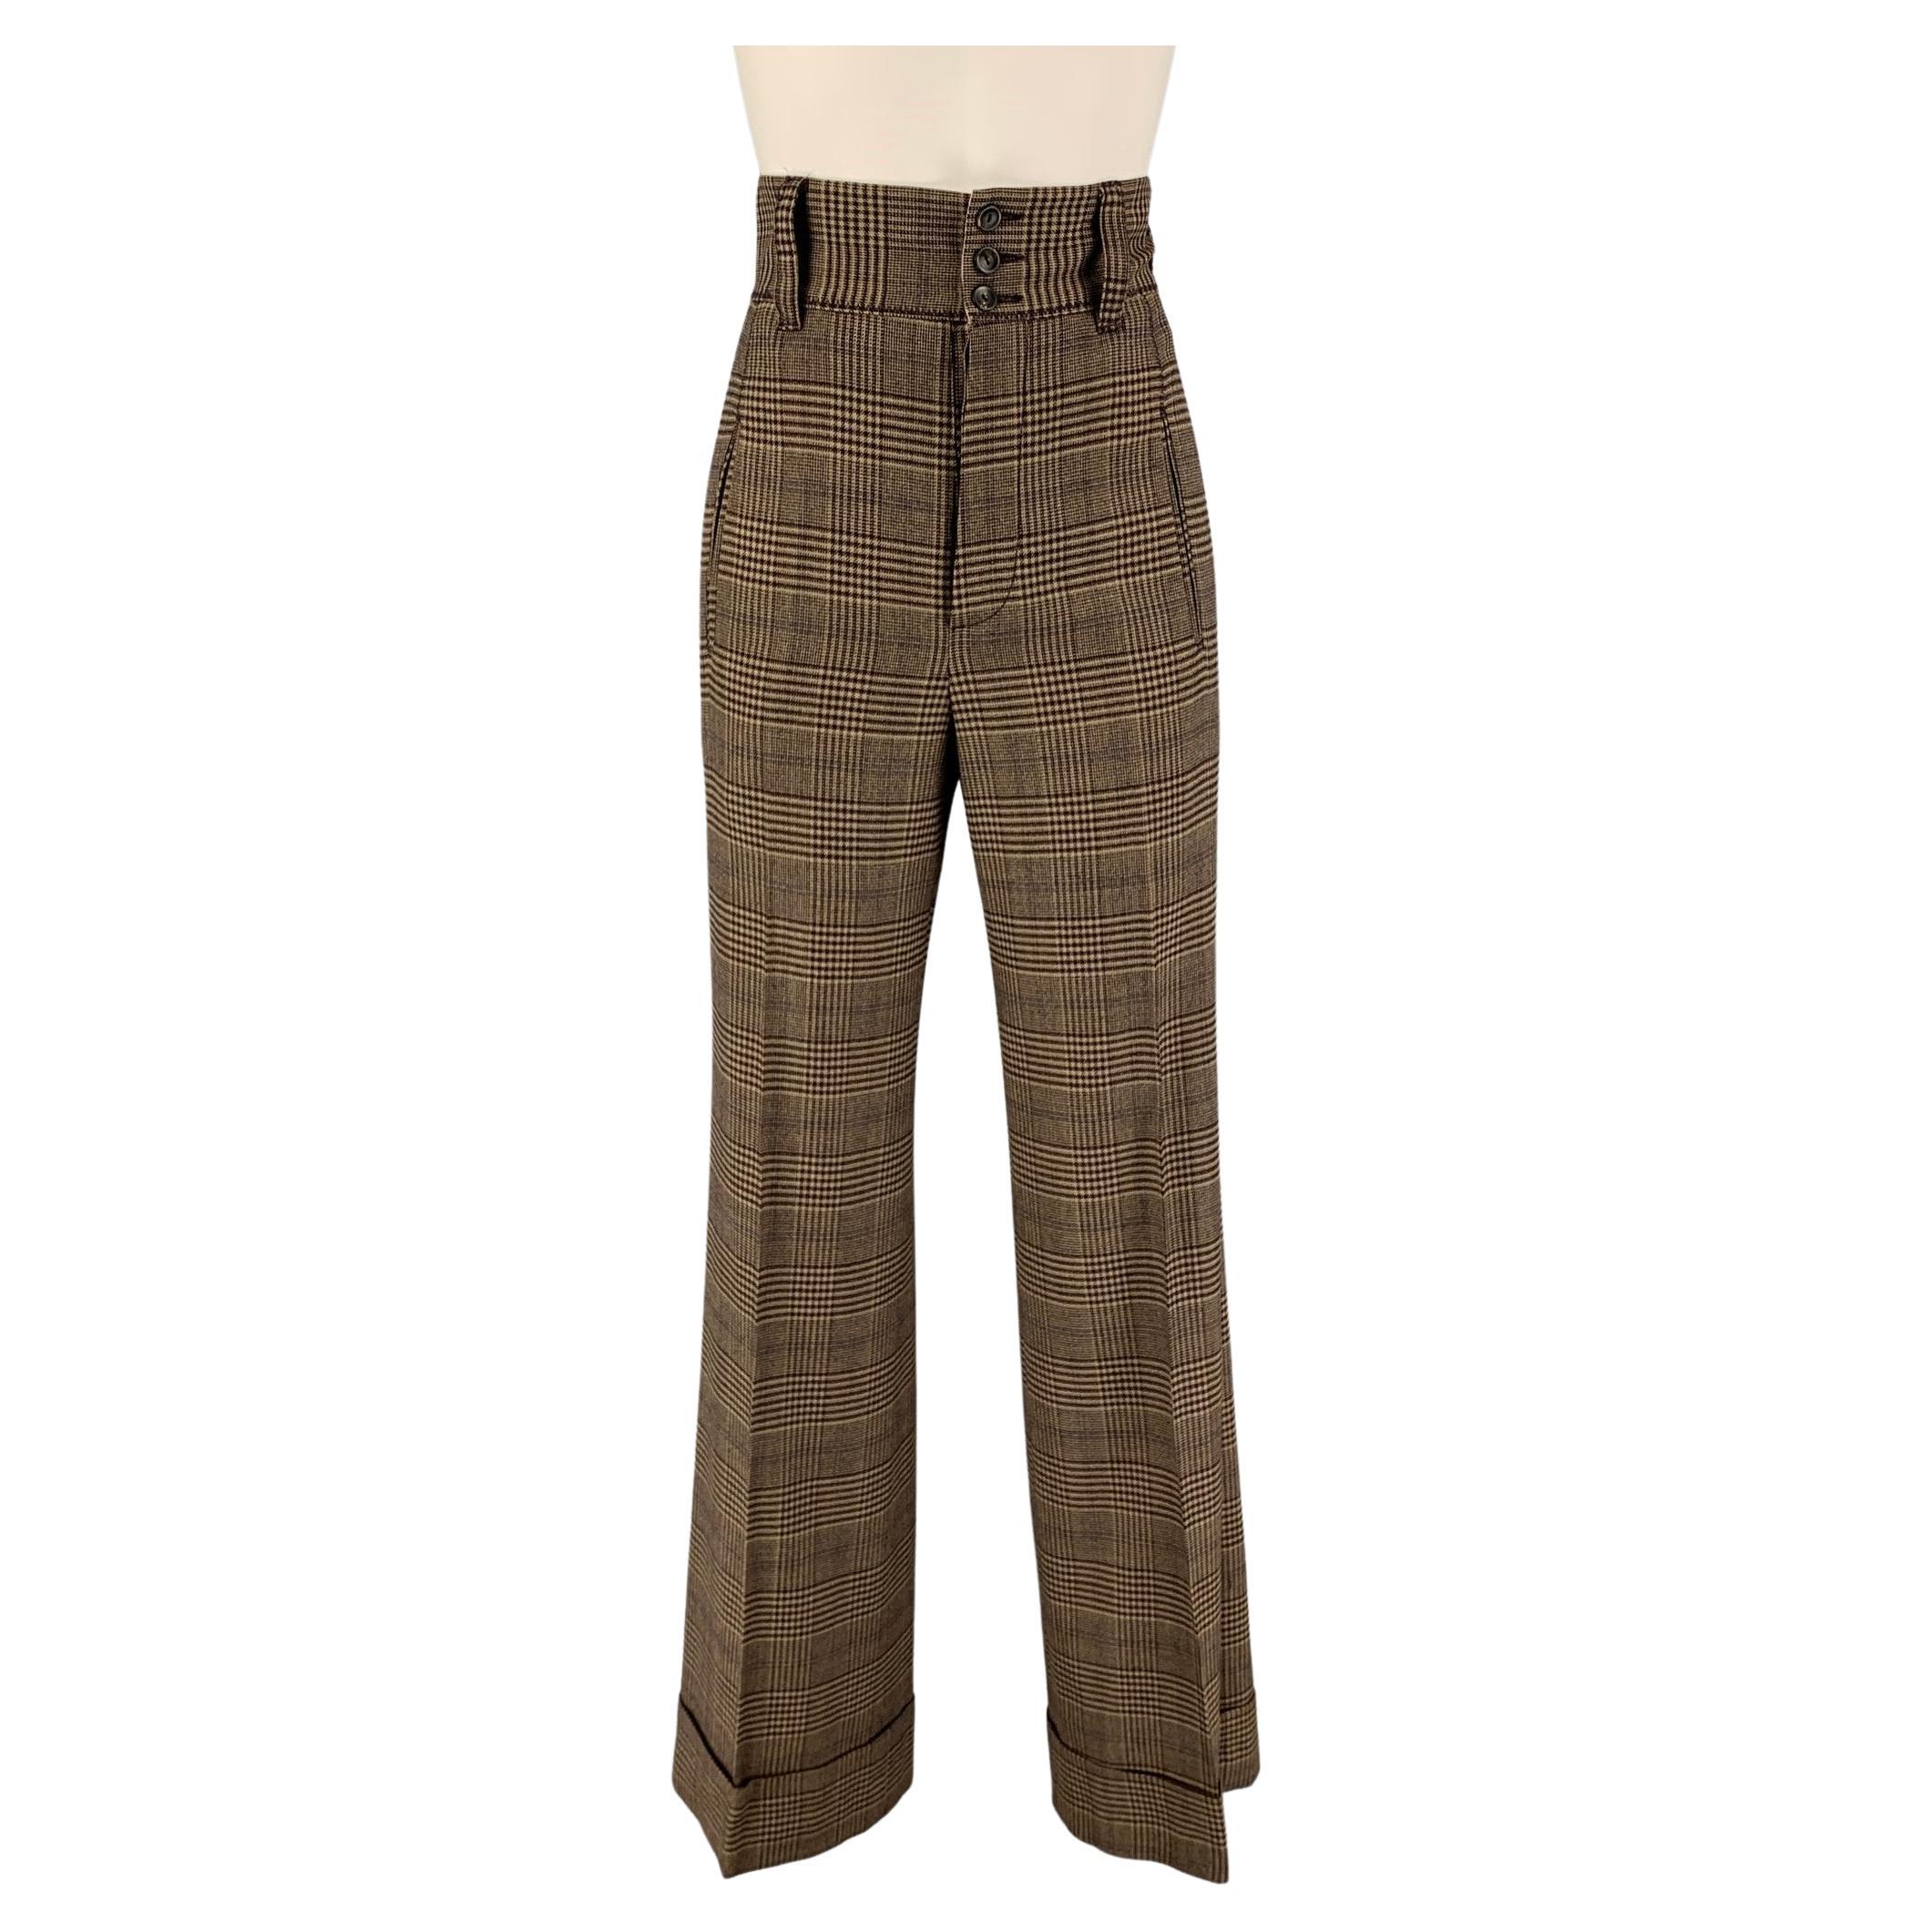 GAULTIER2 by JEAN PAUL GAULTIER Size 6 Brown Tan Wool Rayon High Waisted Pants